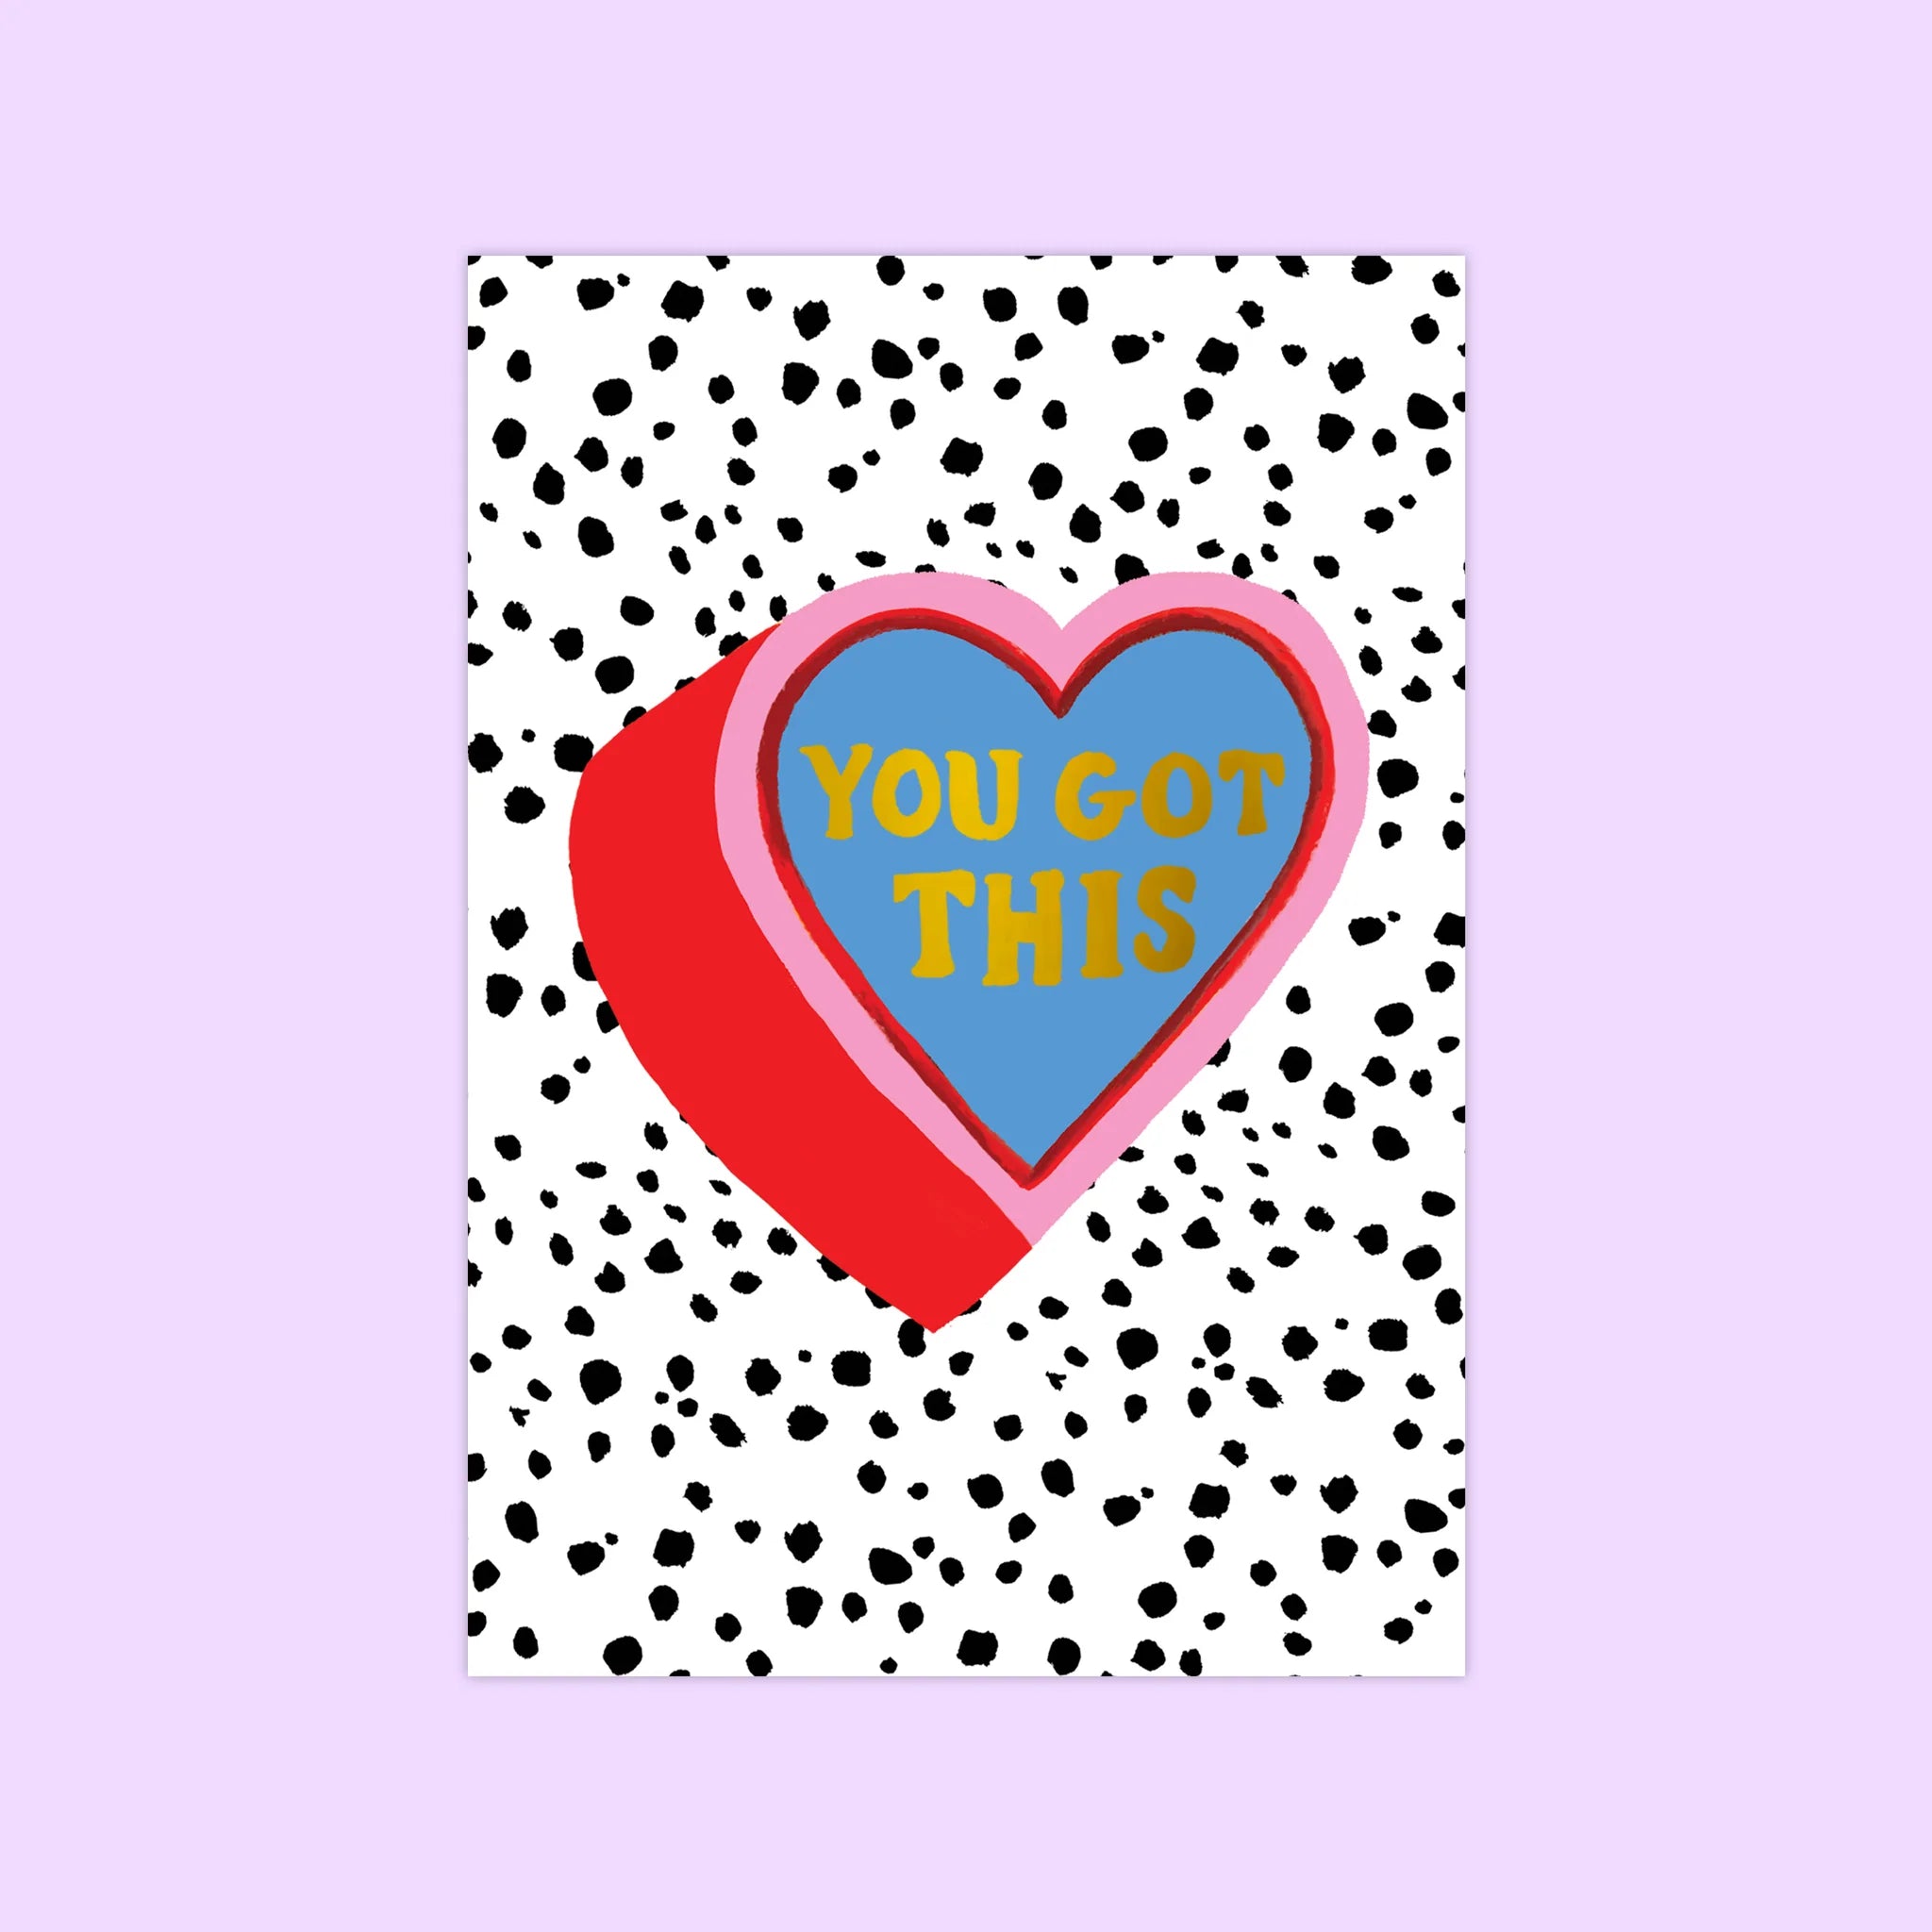 YOU GOT THIS (HEART & SPOTS) | CARD BY ELEANOR BOWMER